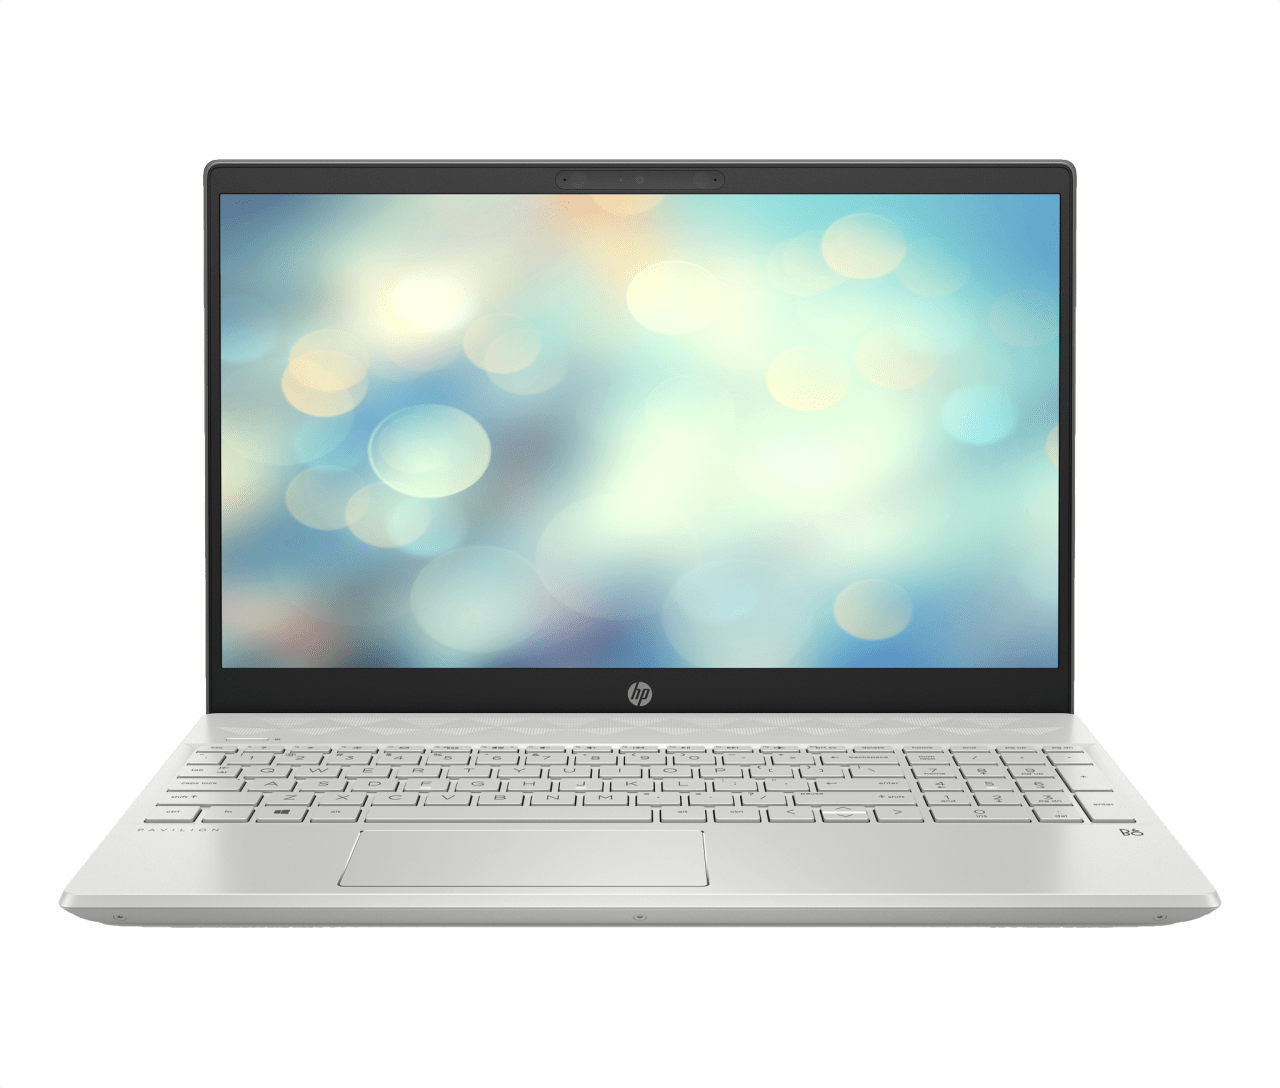 A Silver Laptop With A Blue And White Background